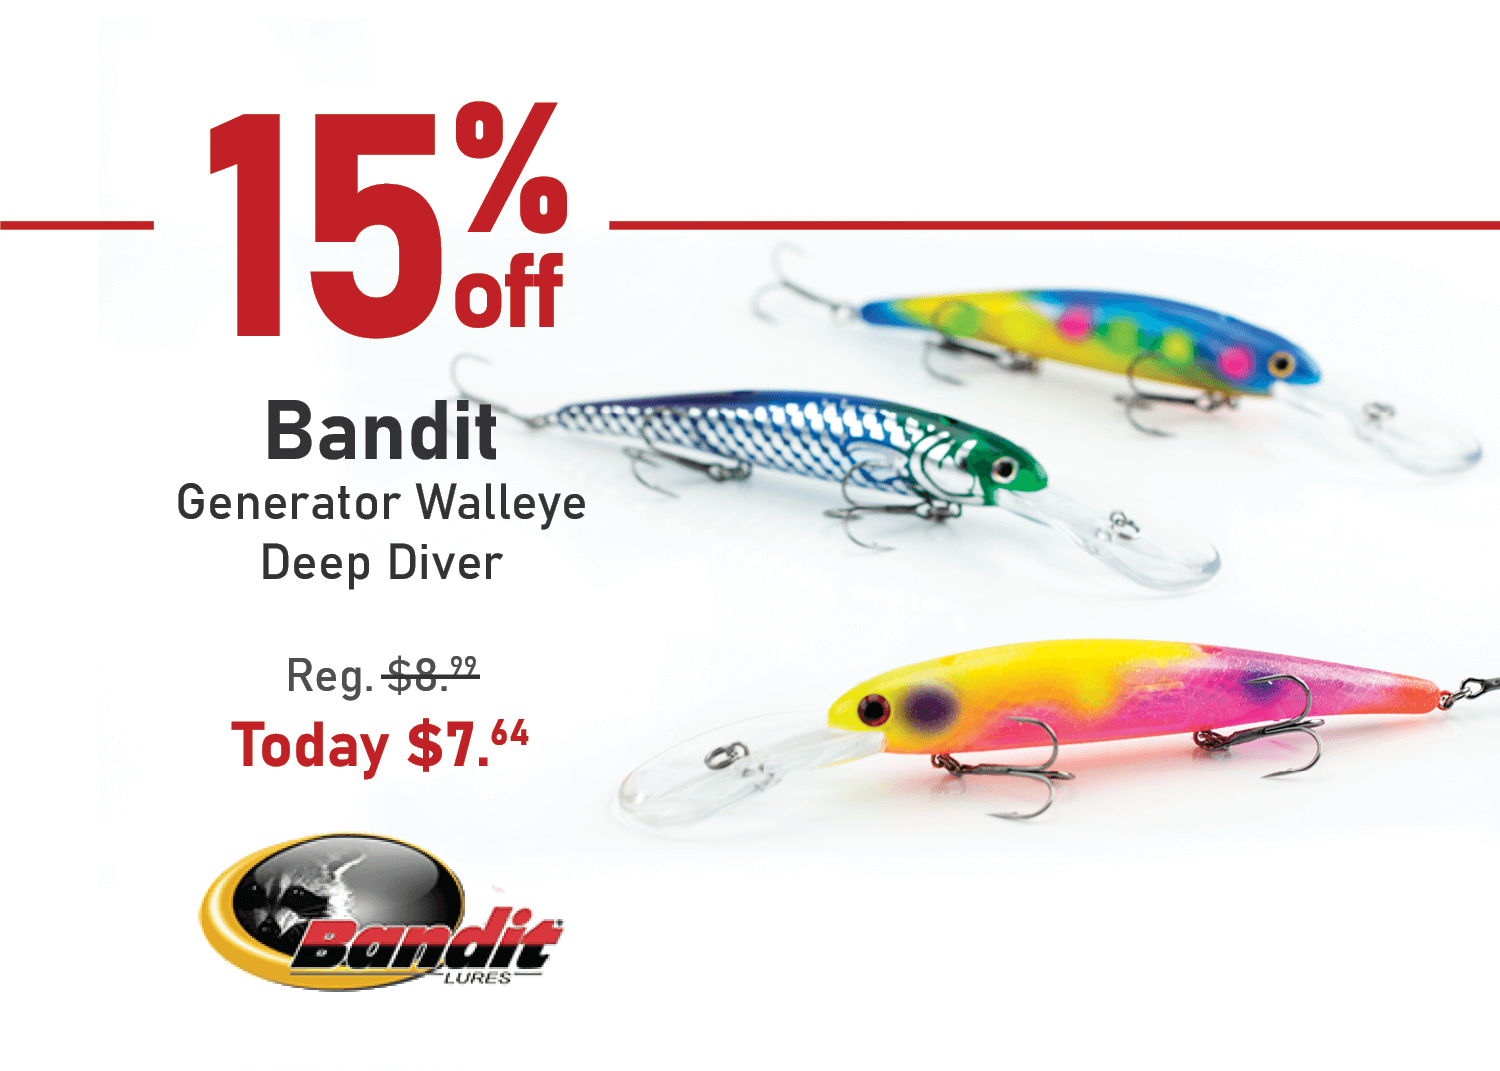 Save 15% on the Bandit Generator Walleye Deep Diver